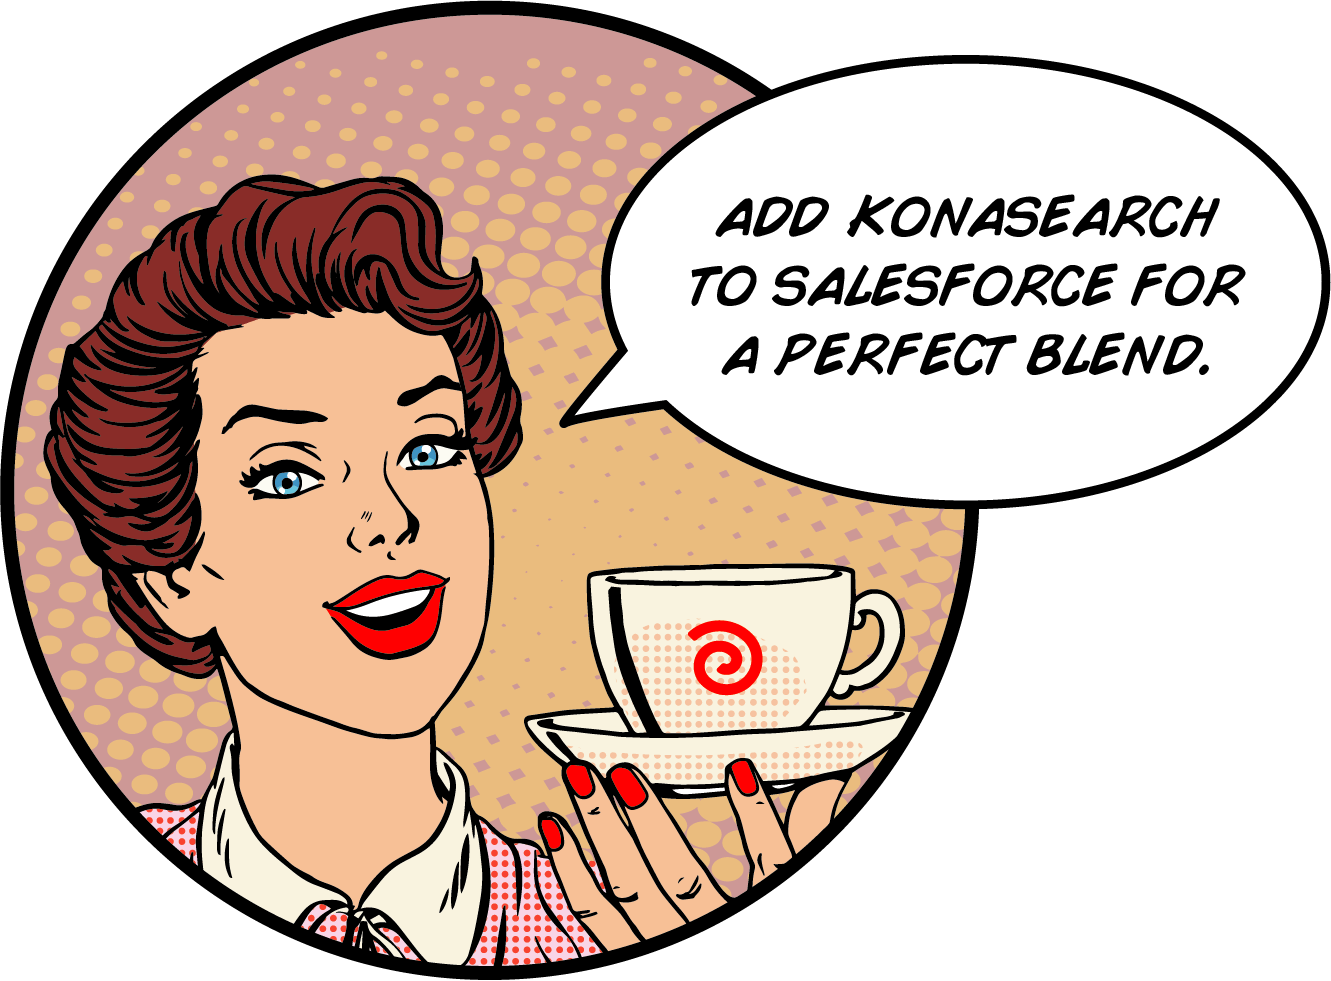 Add KonaSearch to Salesforce for a perfect blend.